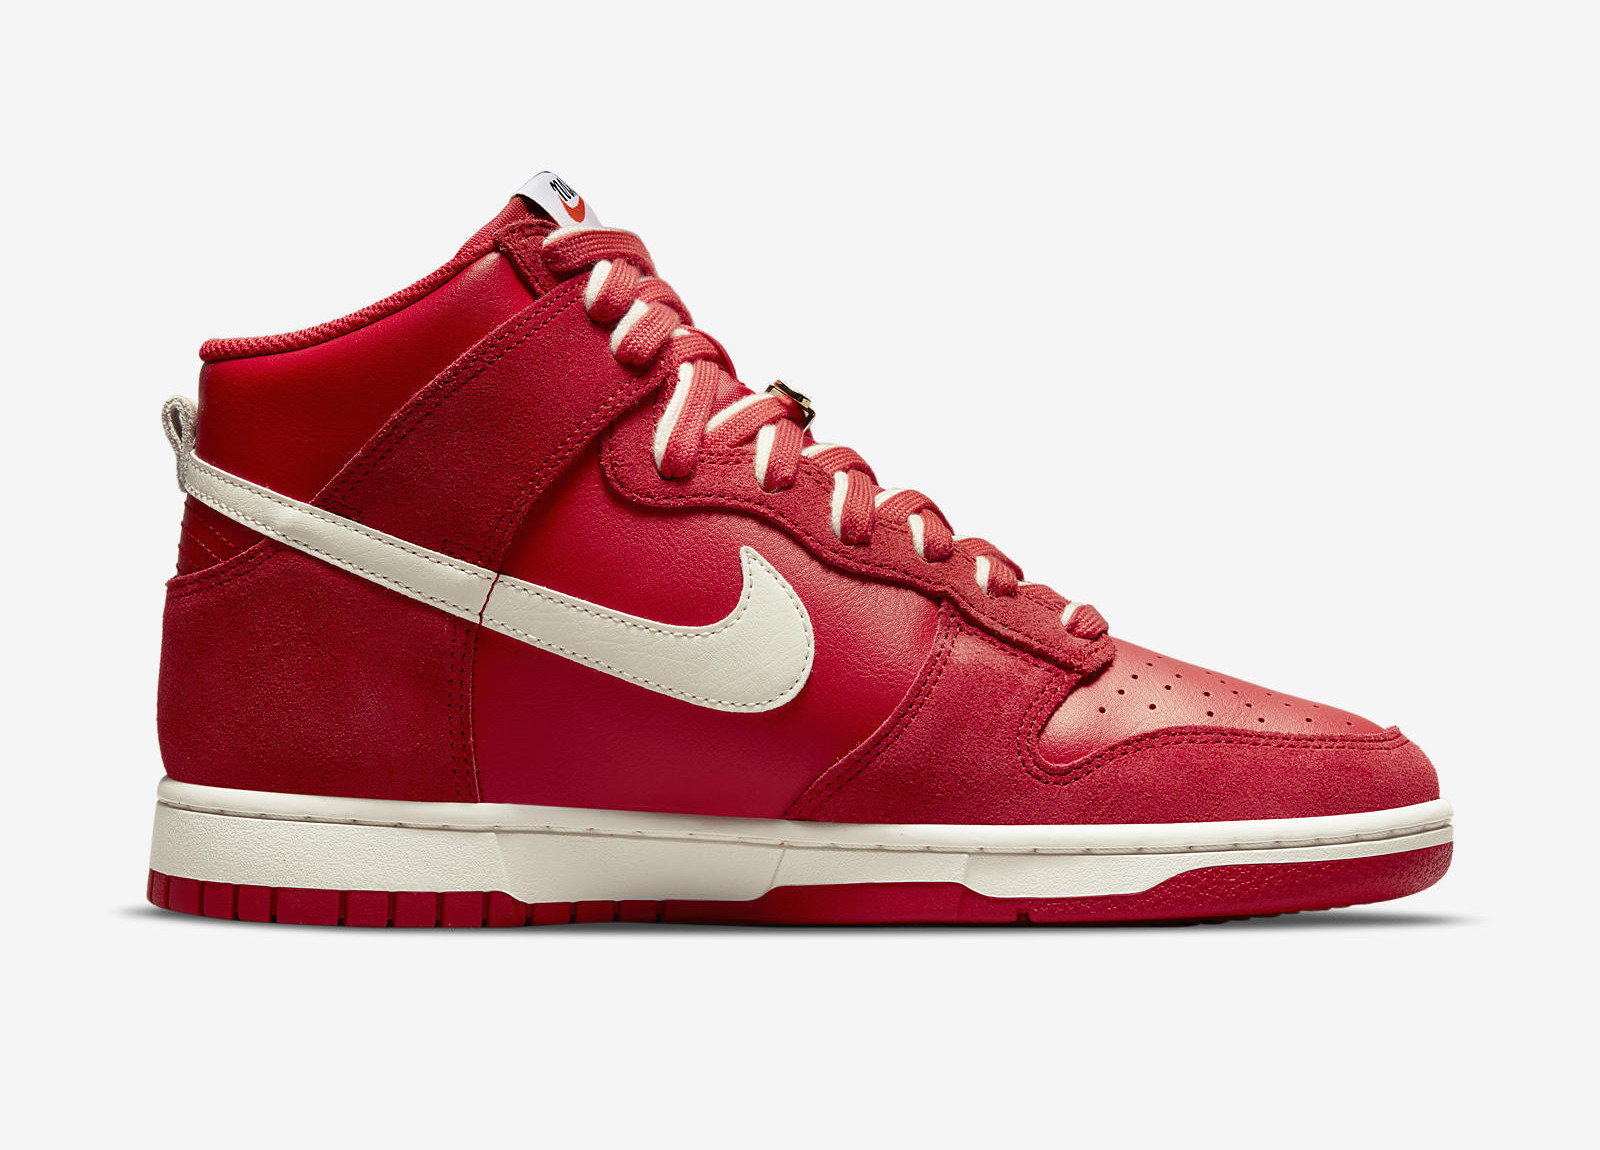 Nike Dunk High
First Use Red